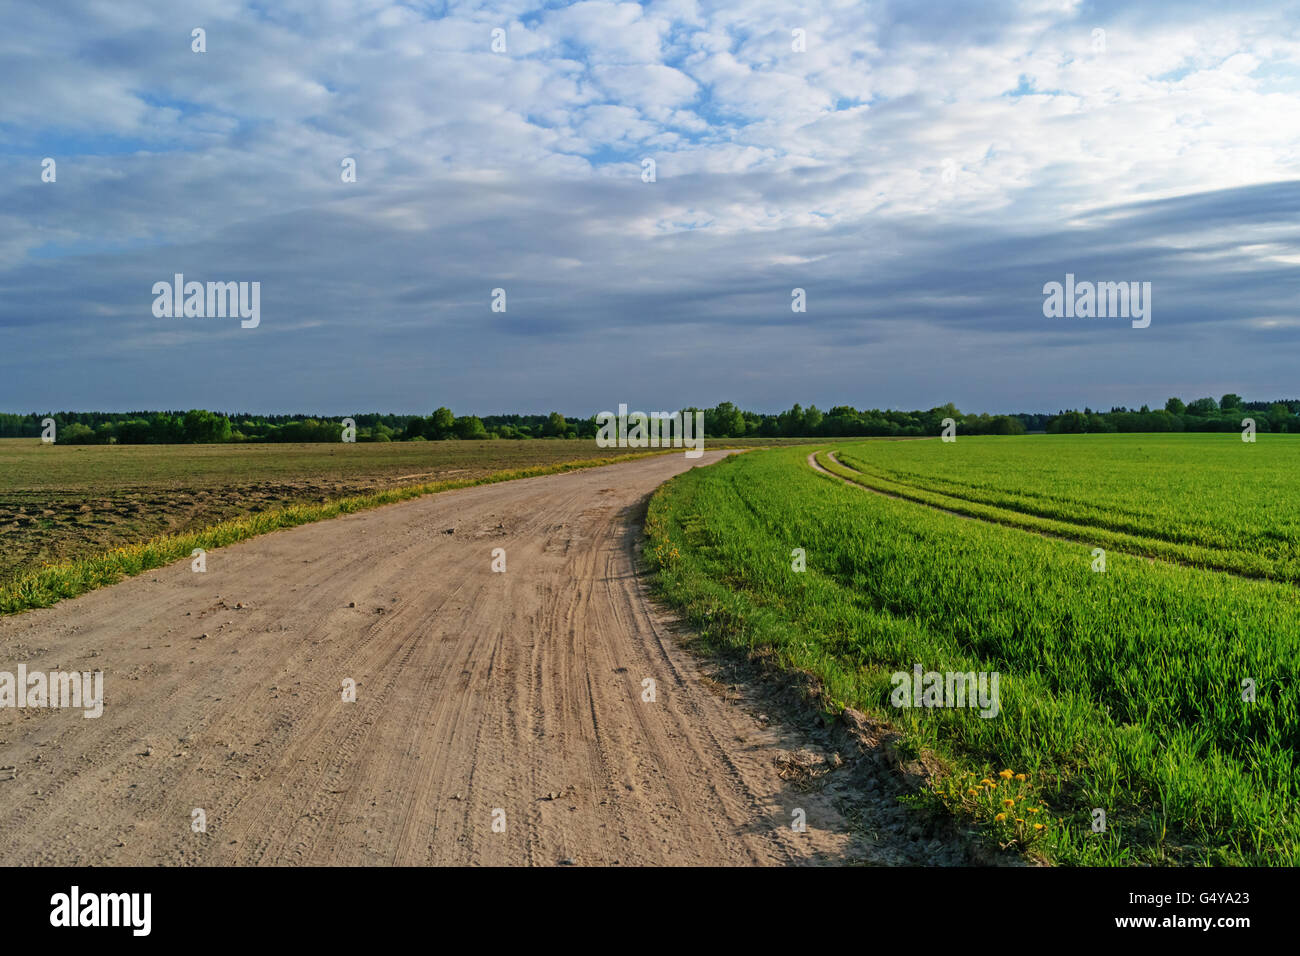 Ground road through agricultural fields.Along the road plowed brown field and green grain fields. Stock Photo